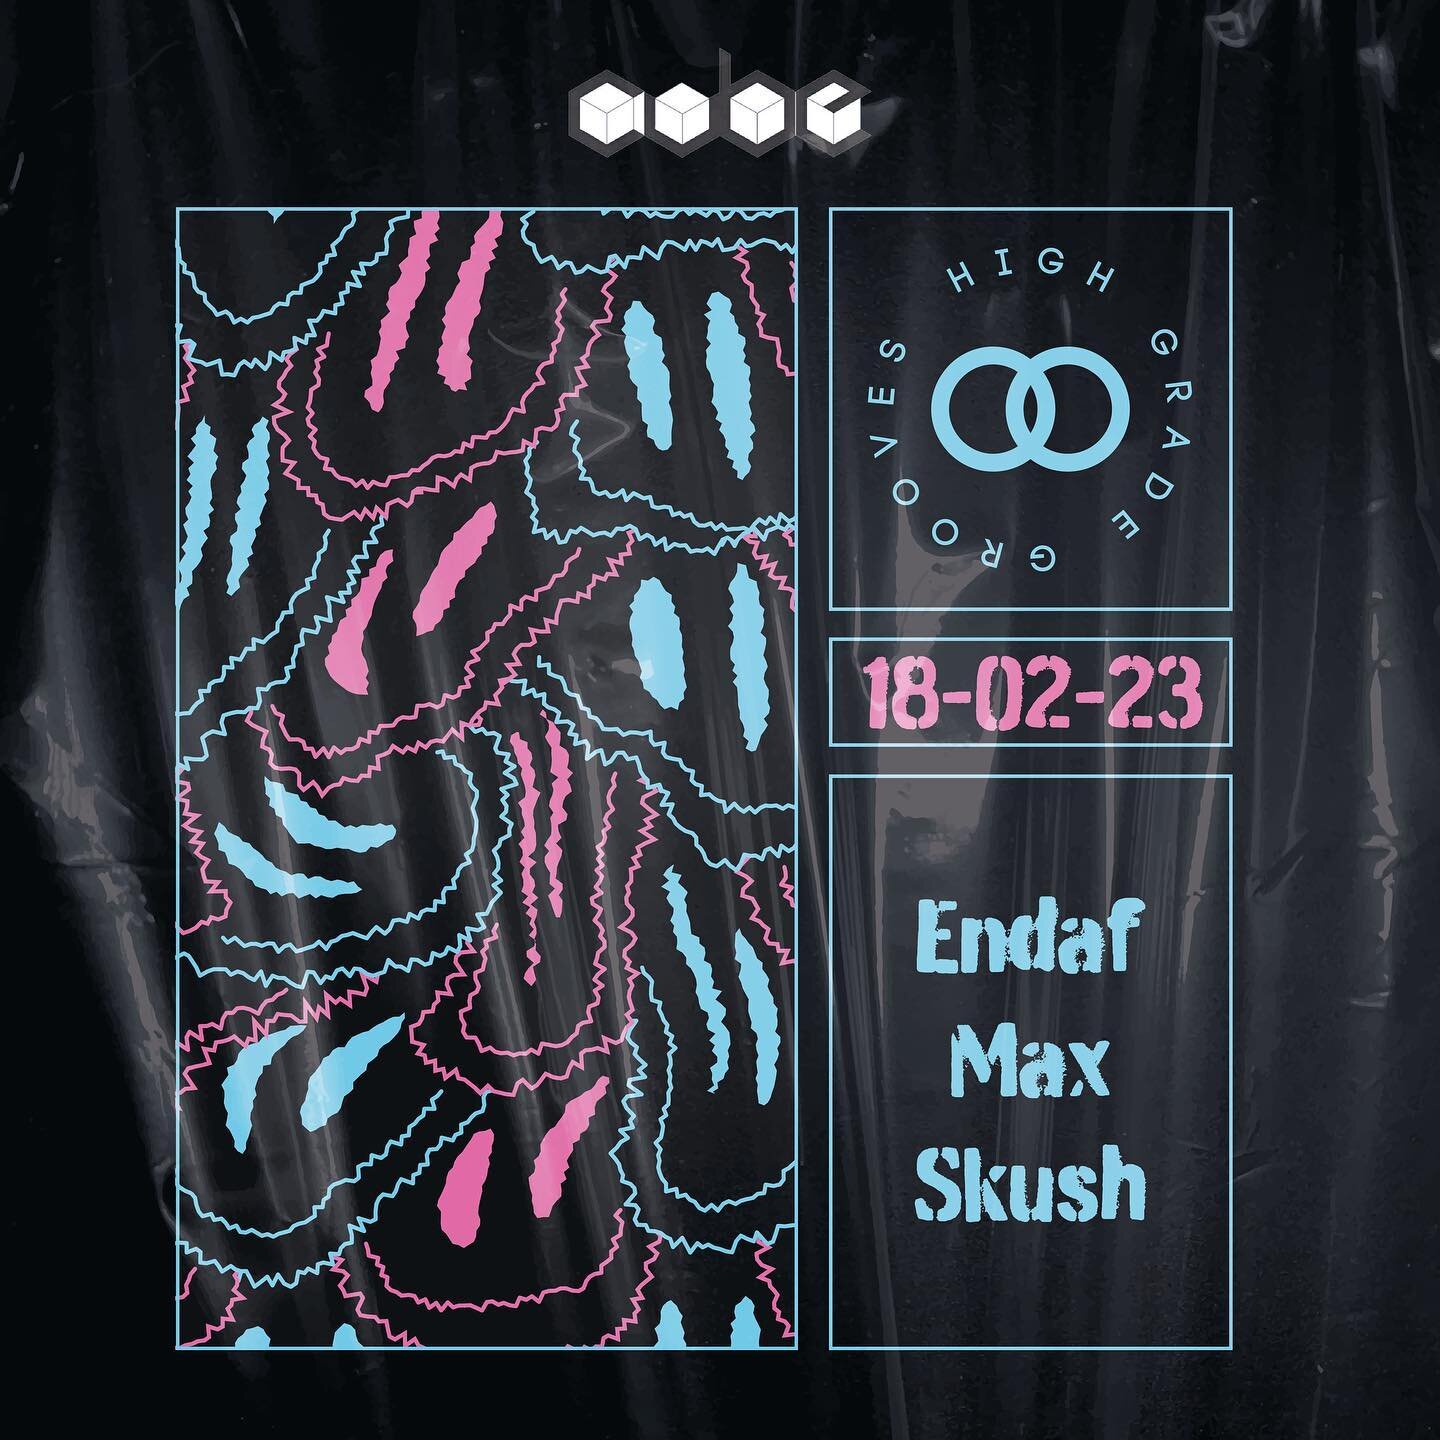 Serving you something spicy 🌶 this Saturday at Curved @cubenightclub 
Head honcho @endaf_ will be joined by BASE 57 residents @max.ansell and @skush_439z to take you on a truly magical 🧙&zwj;♀️ music adventure 

🦁 Jungle 🦁
💊 Breakbeat 💊
🔮 Dubs